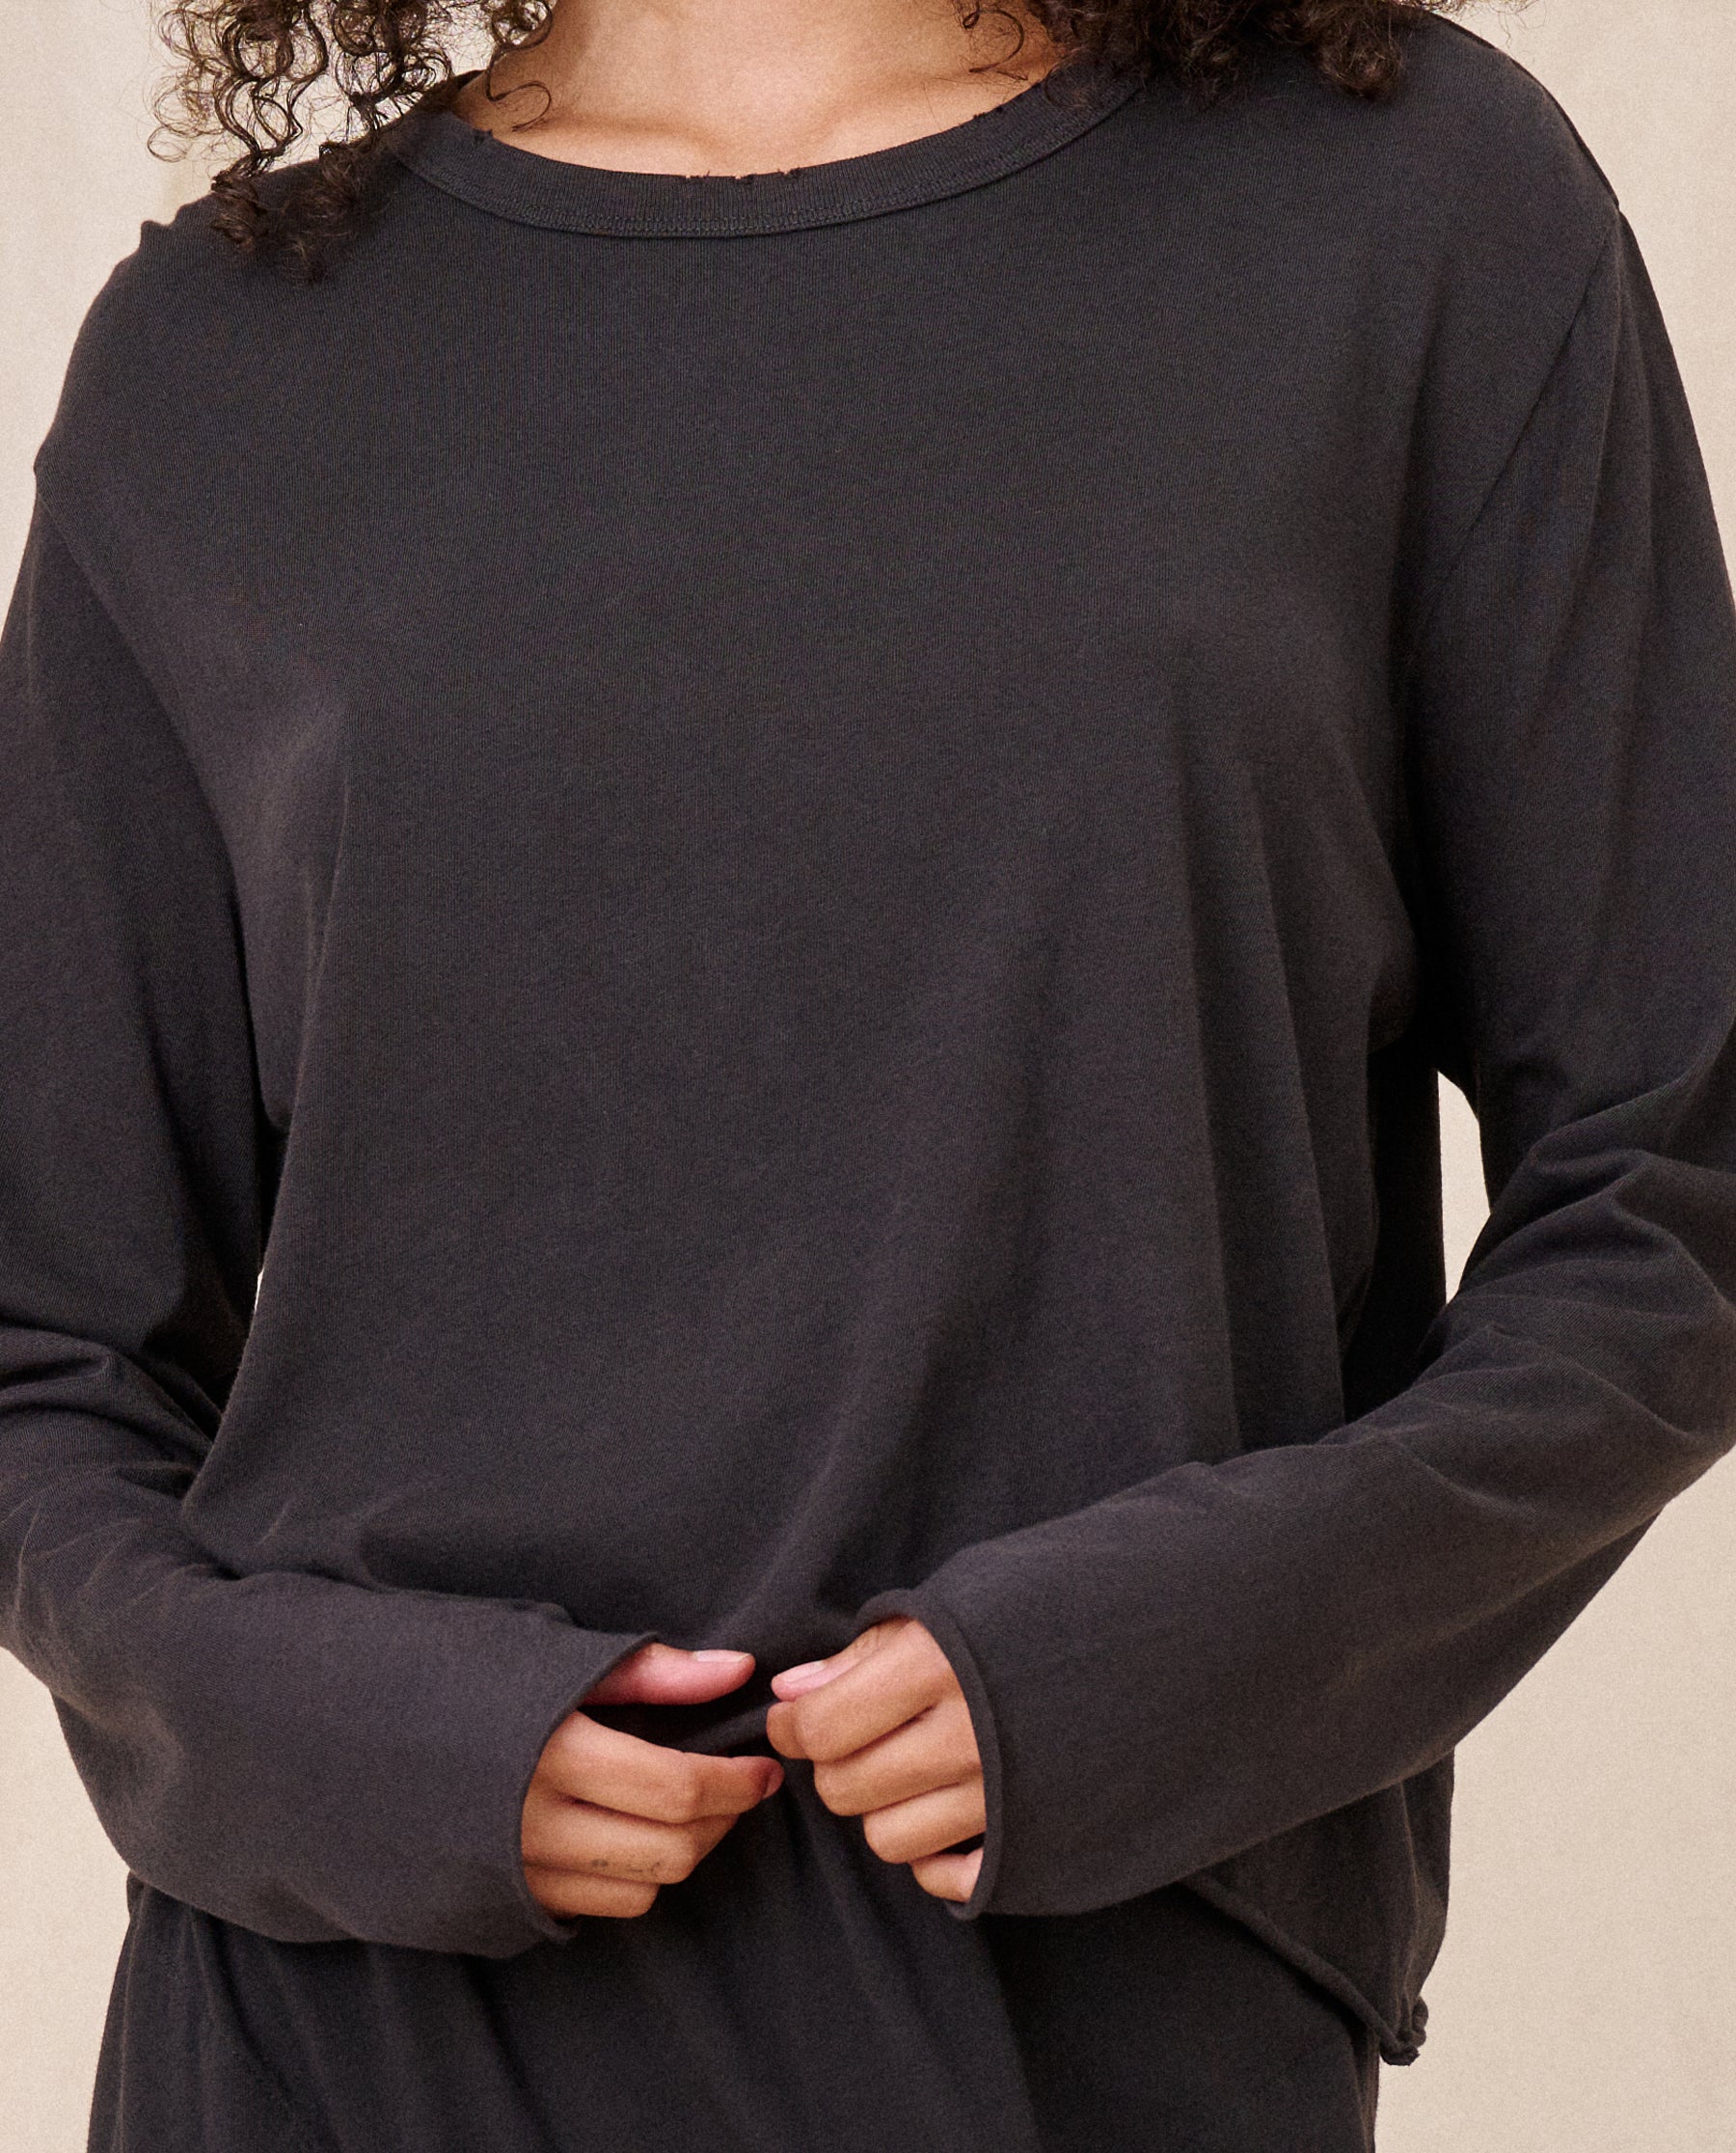 The Long Sleeve Crop Tee. -- Almost Black TEES THE GREAT. CORE KNITS